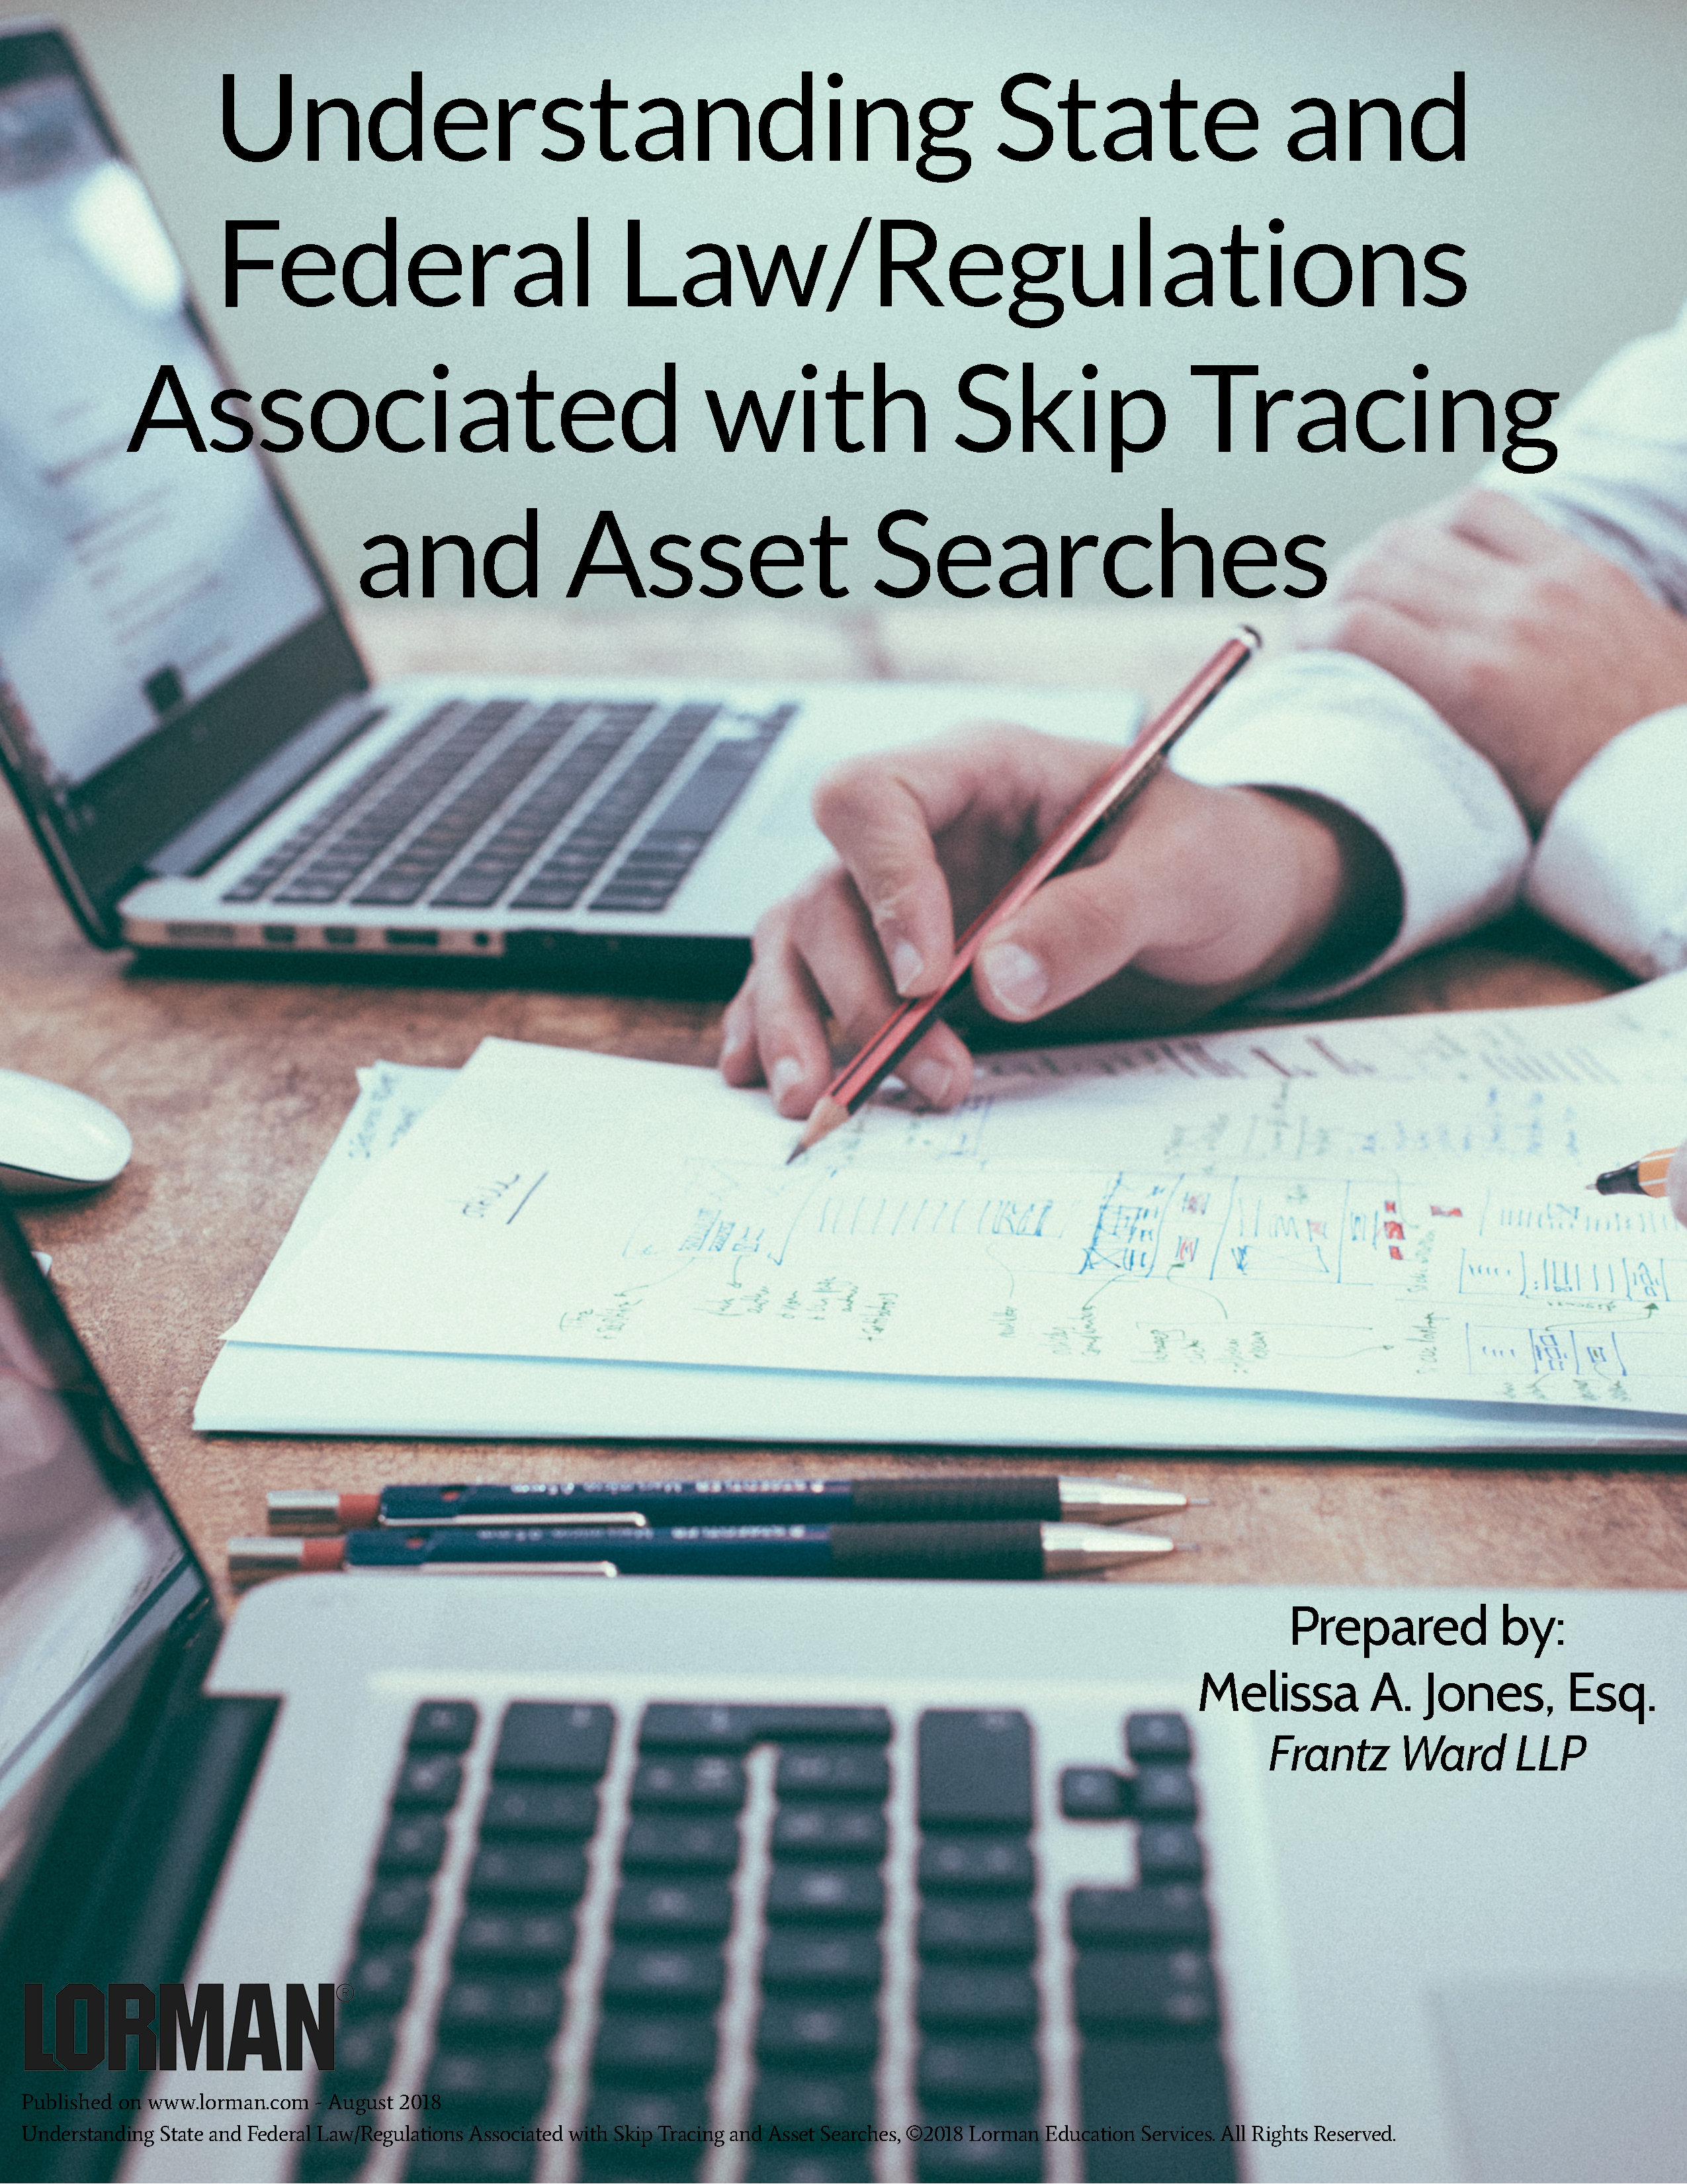 Understanding State and Federal Law/Regulations Associated with Skip Tracing and Asset Searches